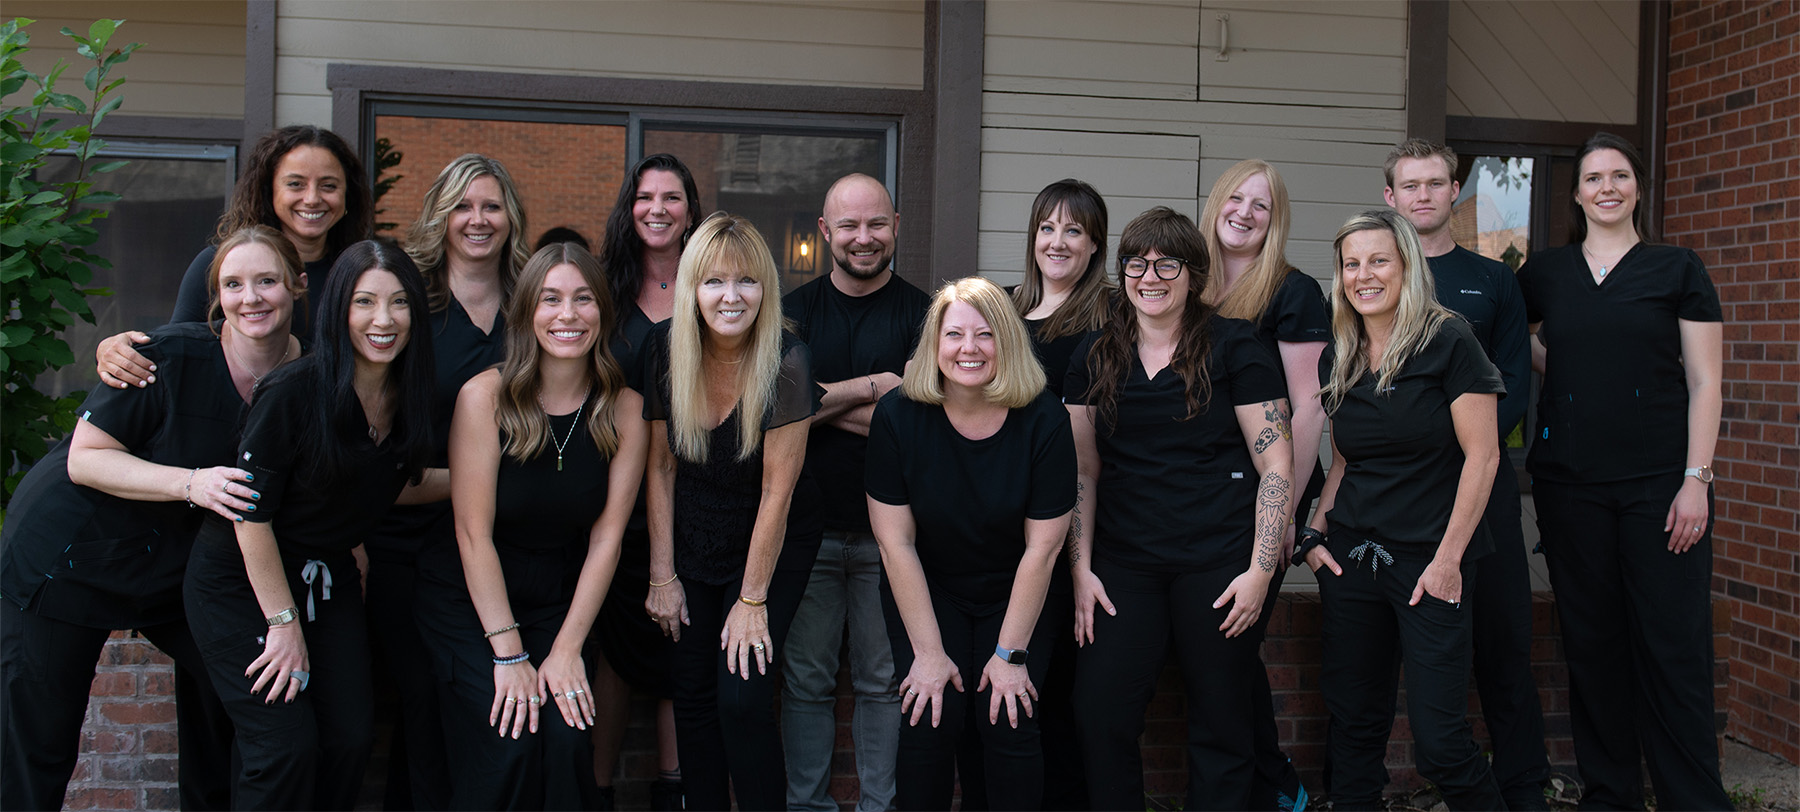 Group photo of the psychiatry, counseling, and IV infusion team at integrative mental health center Ballen Medical & Wellness in Denver, Colorado.